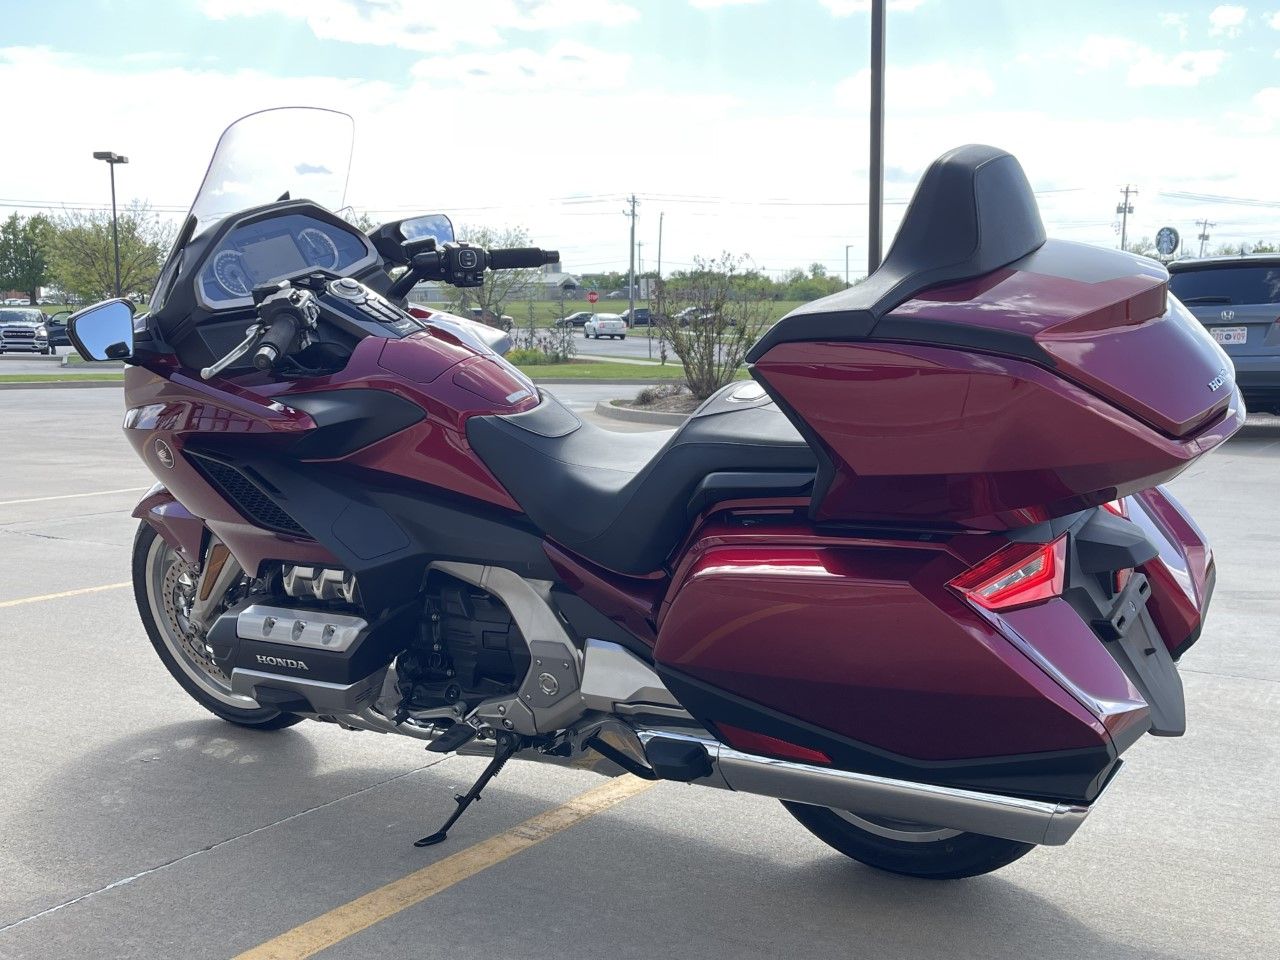 2018 Honda Gold Wing Tour in Norman, Oklahoma - Photo 6